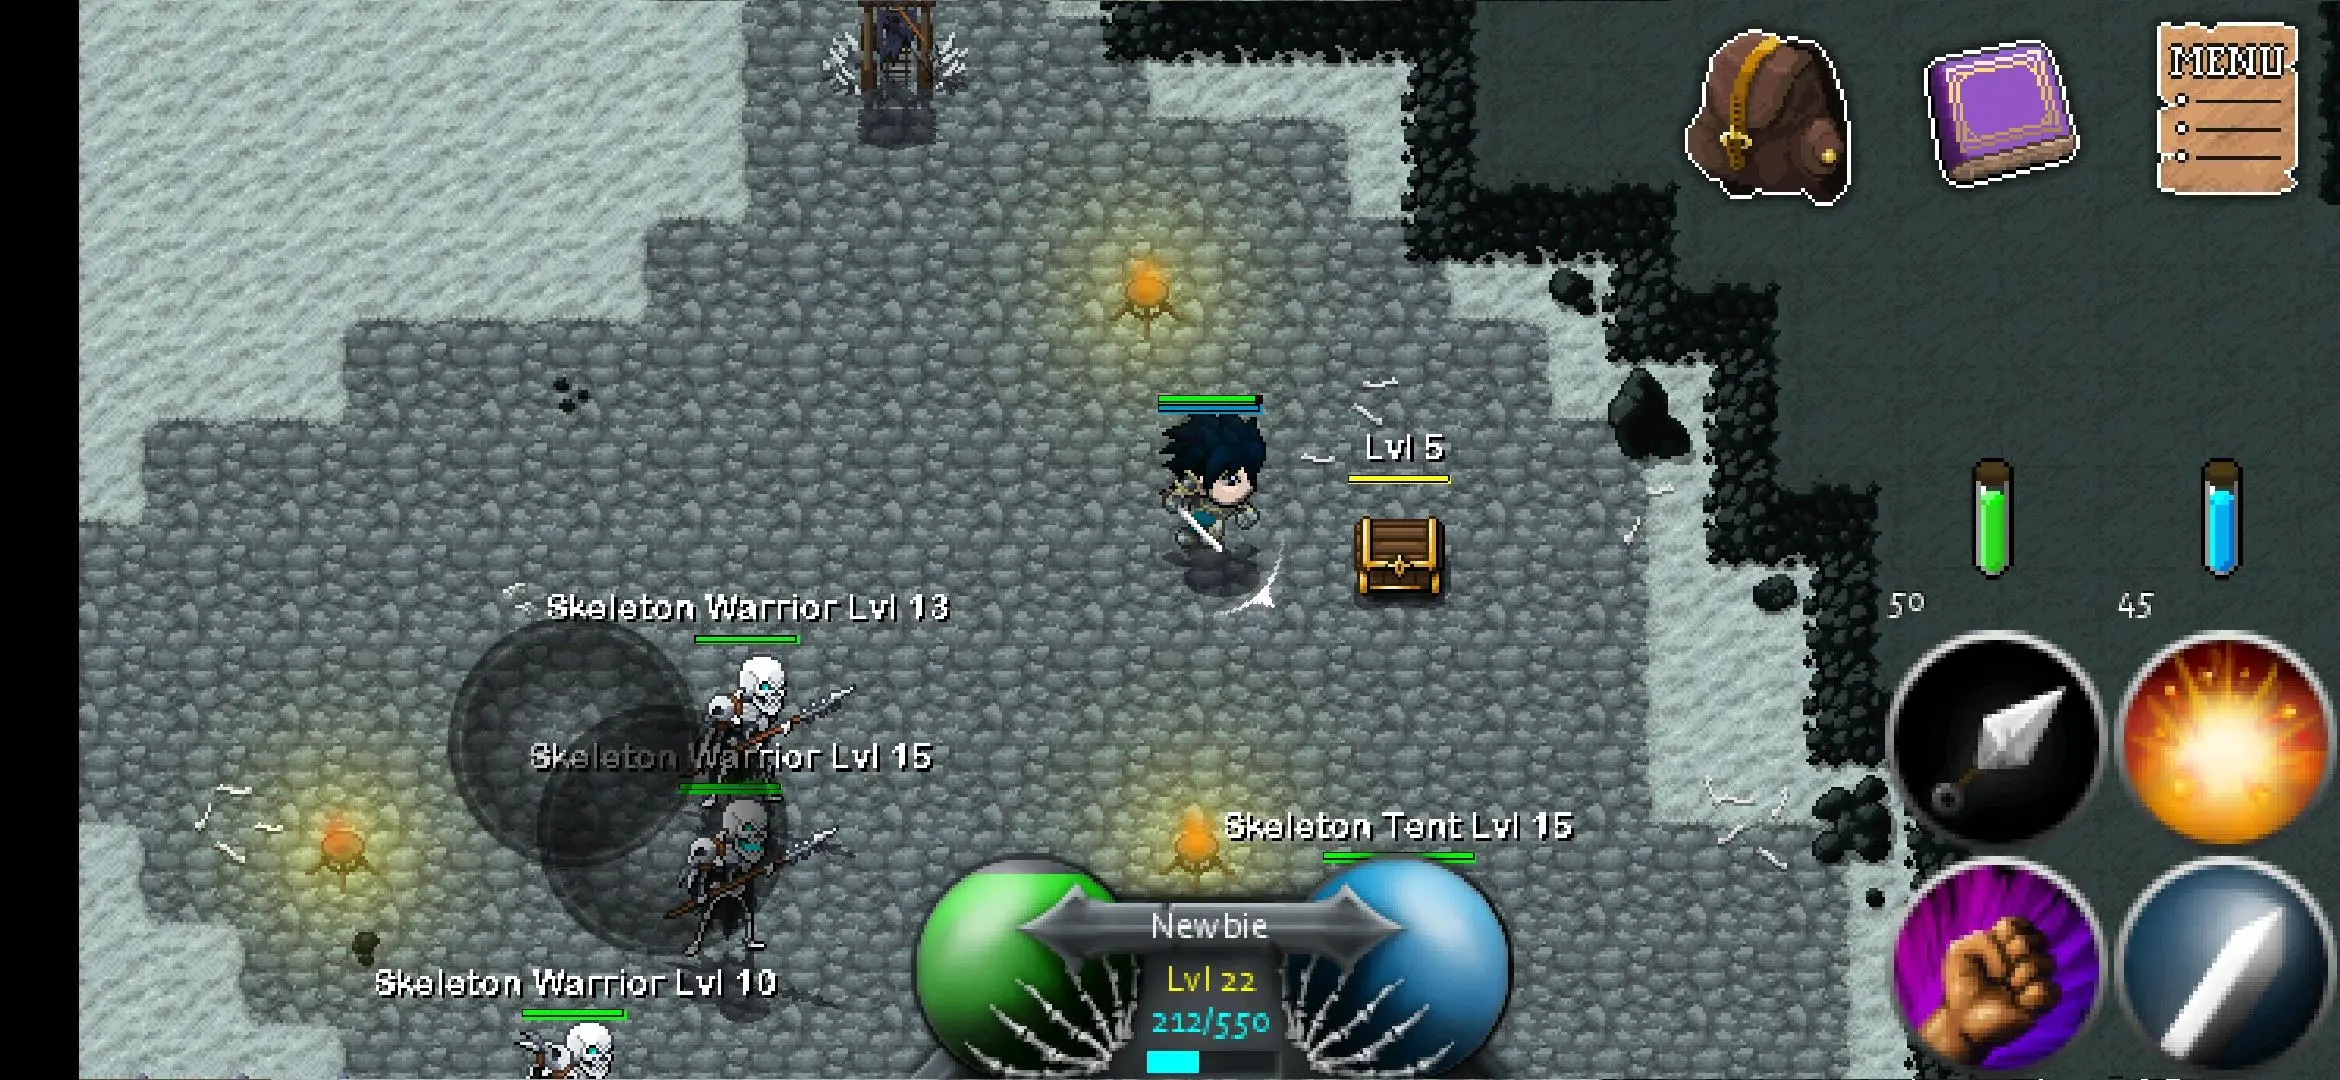 Download WOTU RPG Online android on PC